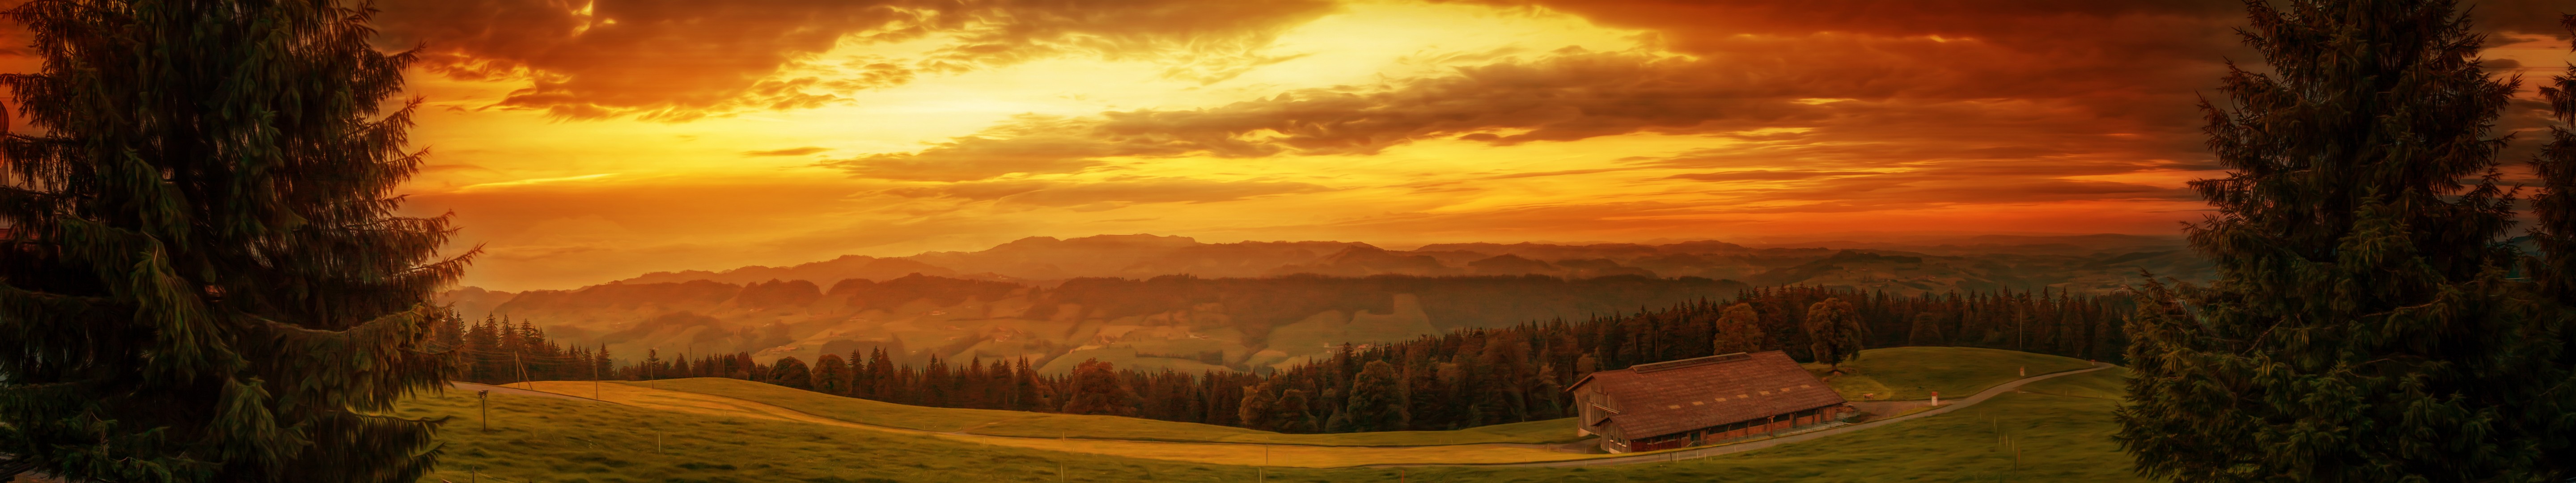 sky, Gold, Green, Trees, Hut, House, Road, Fence, Bench, Sunset, Hills, Panorama Wallpaper